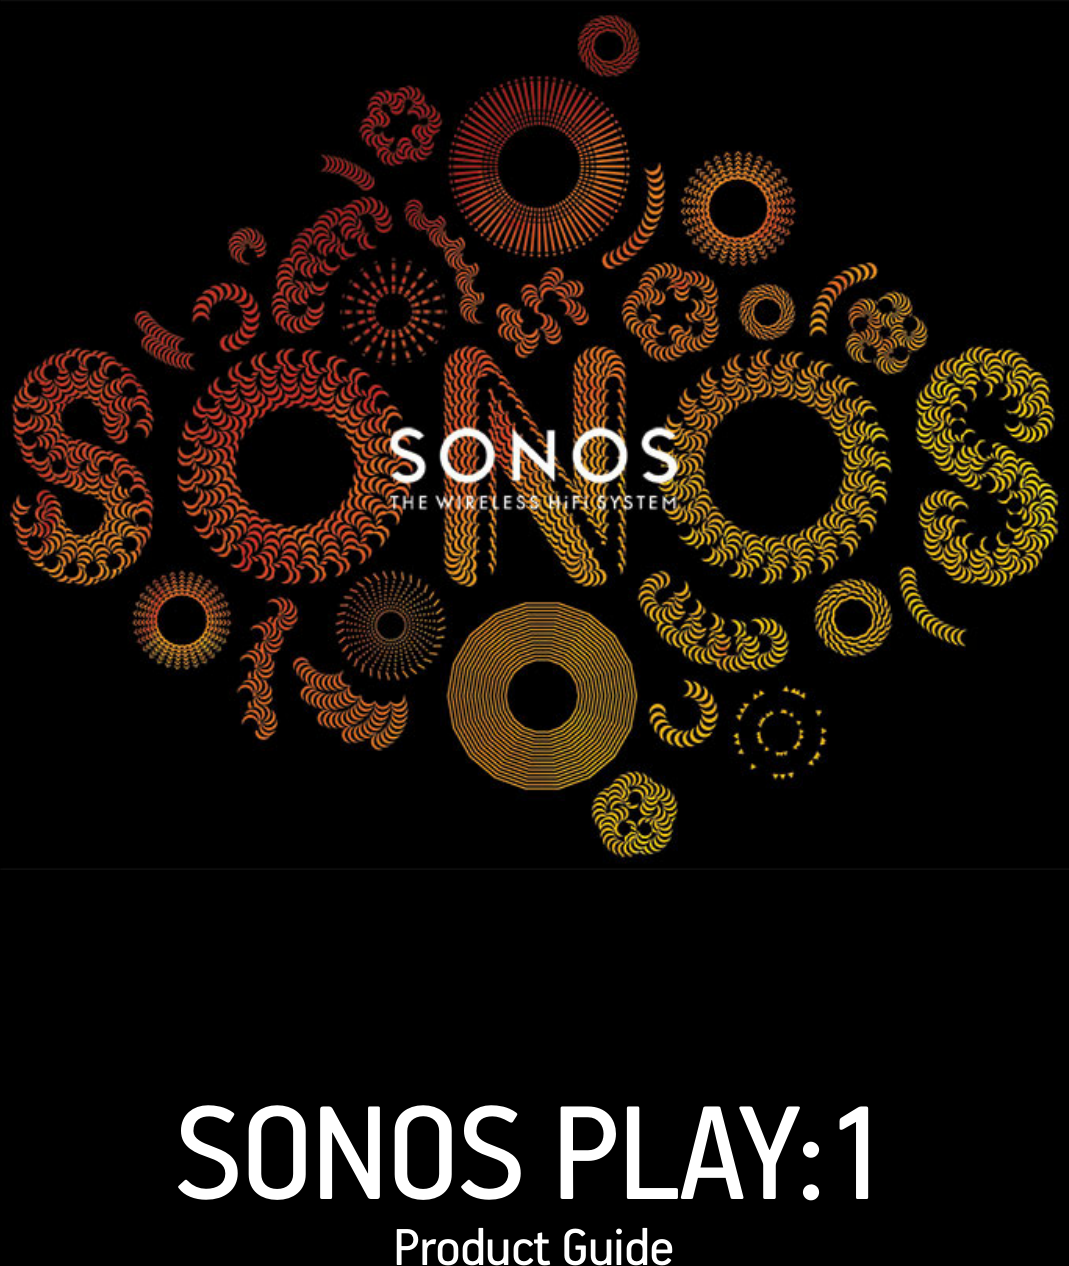 SONOS PLAY:1 Product Guide